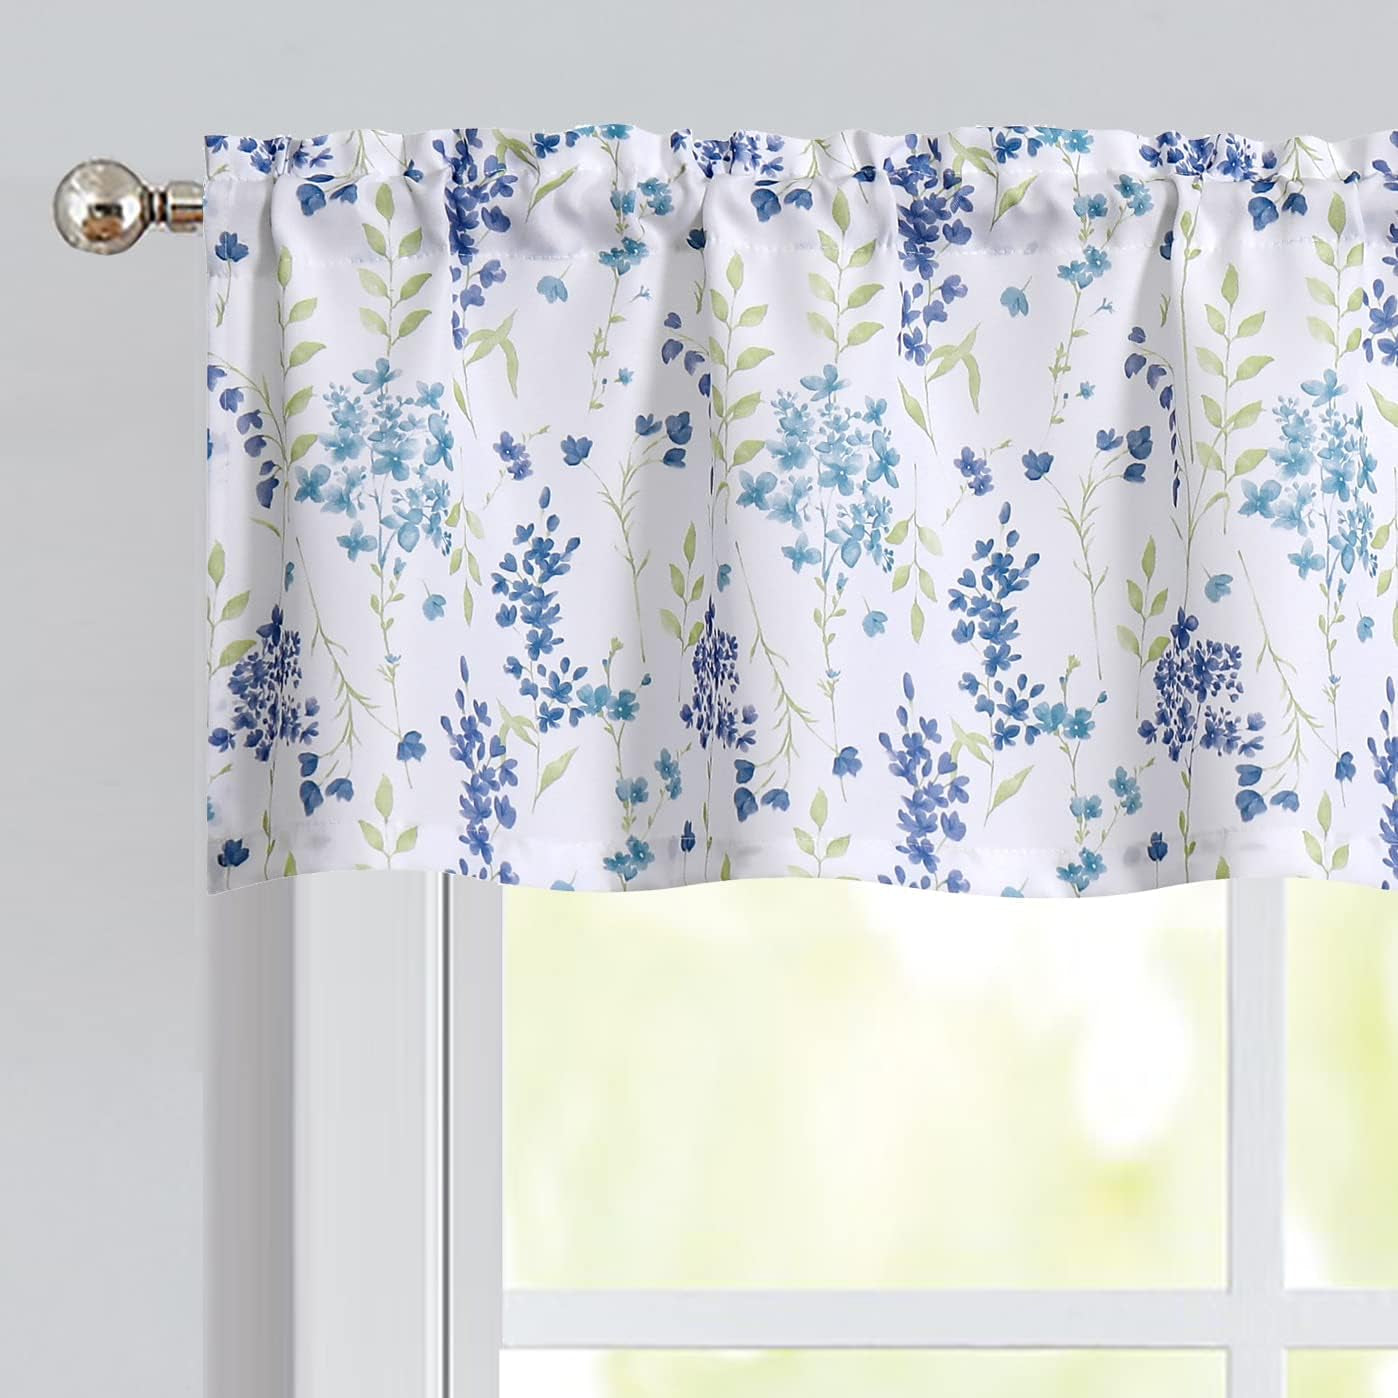 Blue Colorful Floral Tie up Kitchen Curtain Valance Botanical Flower Leaves Print, Farmhouse Rod Pocket Small Curtains for Kitchen Cafe Bathroom Window Treatment, 56" X 15", Watercolor, 1 Panel